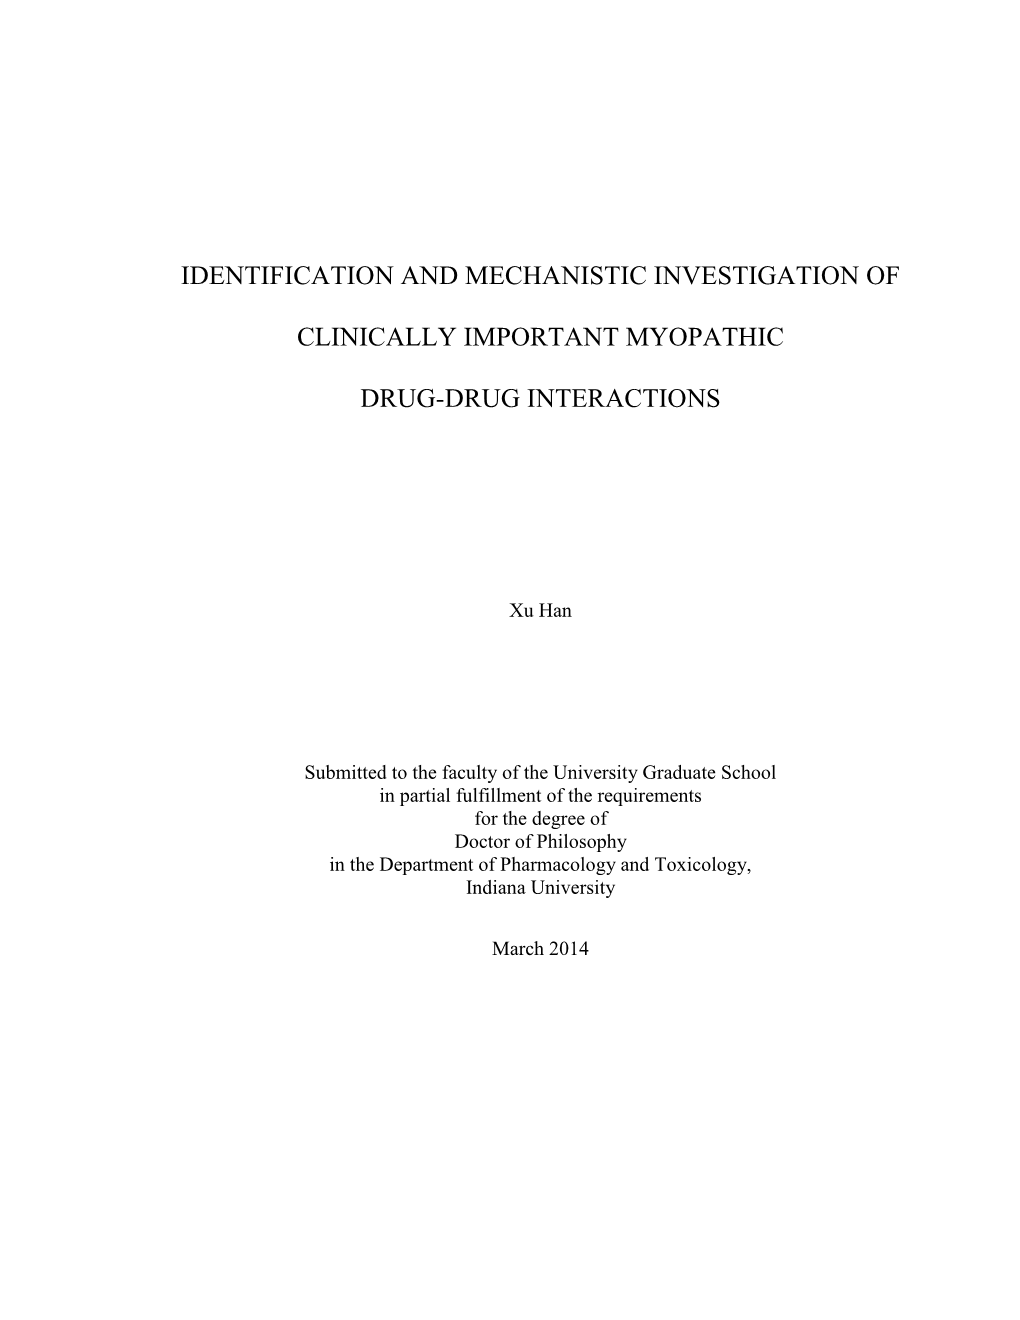 Identification and Mechanistic Investigation of Clinically